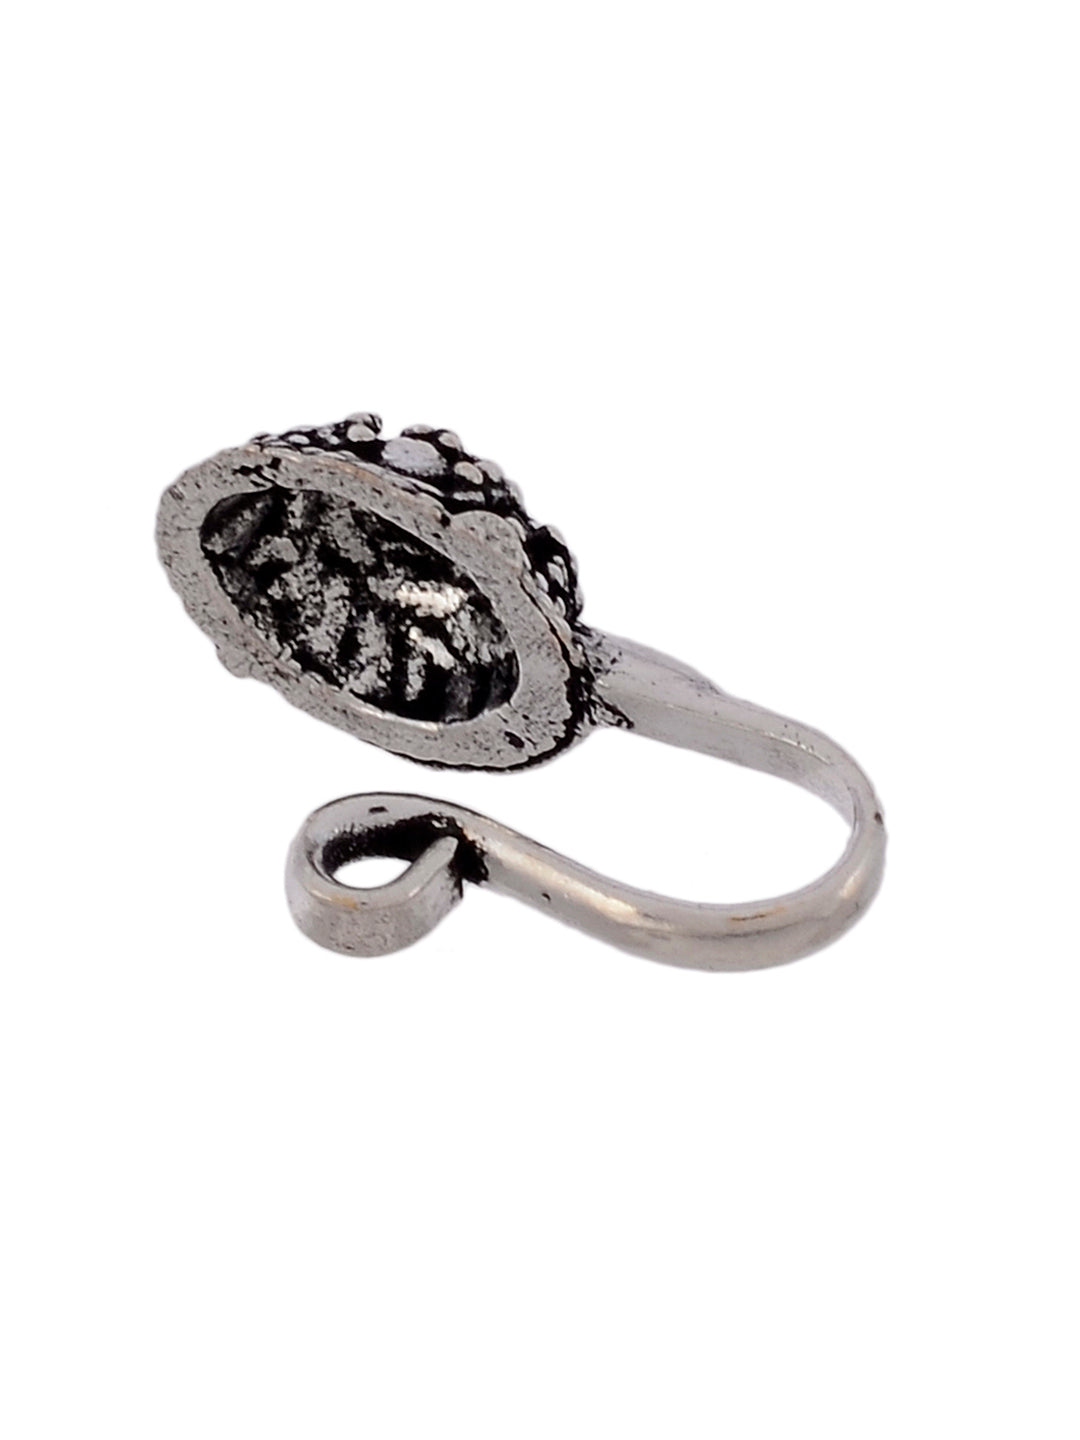 Oxidised Silver-Plated Clip-On Nosepins